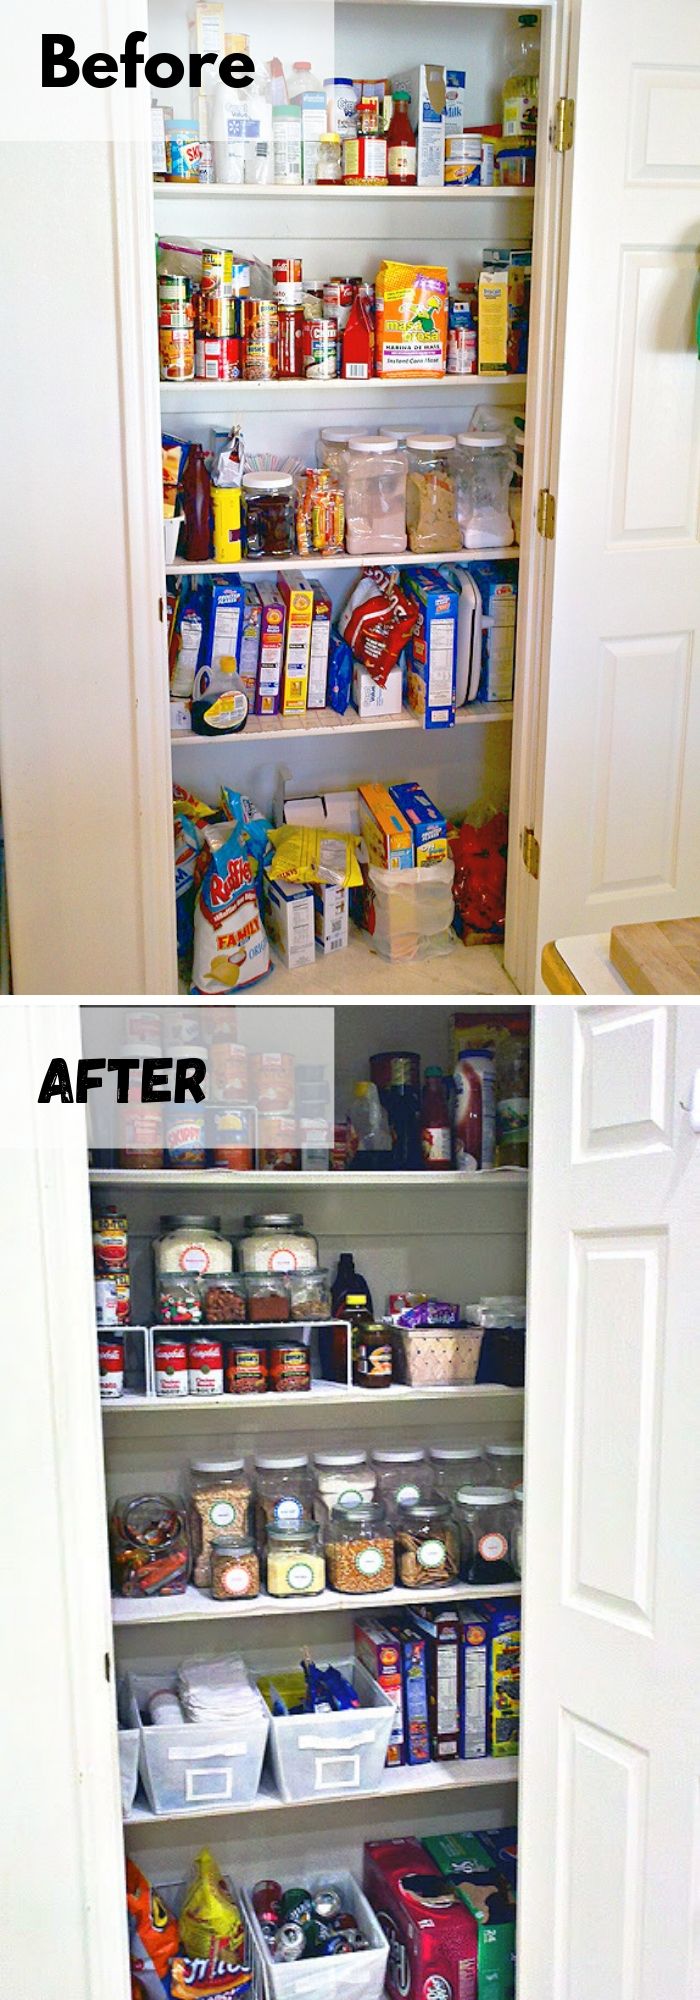 39 tips to organize home